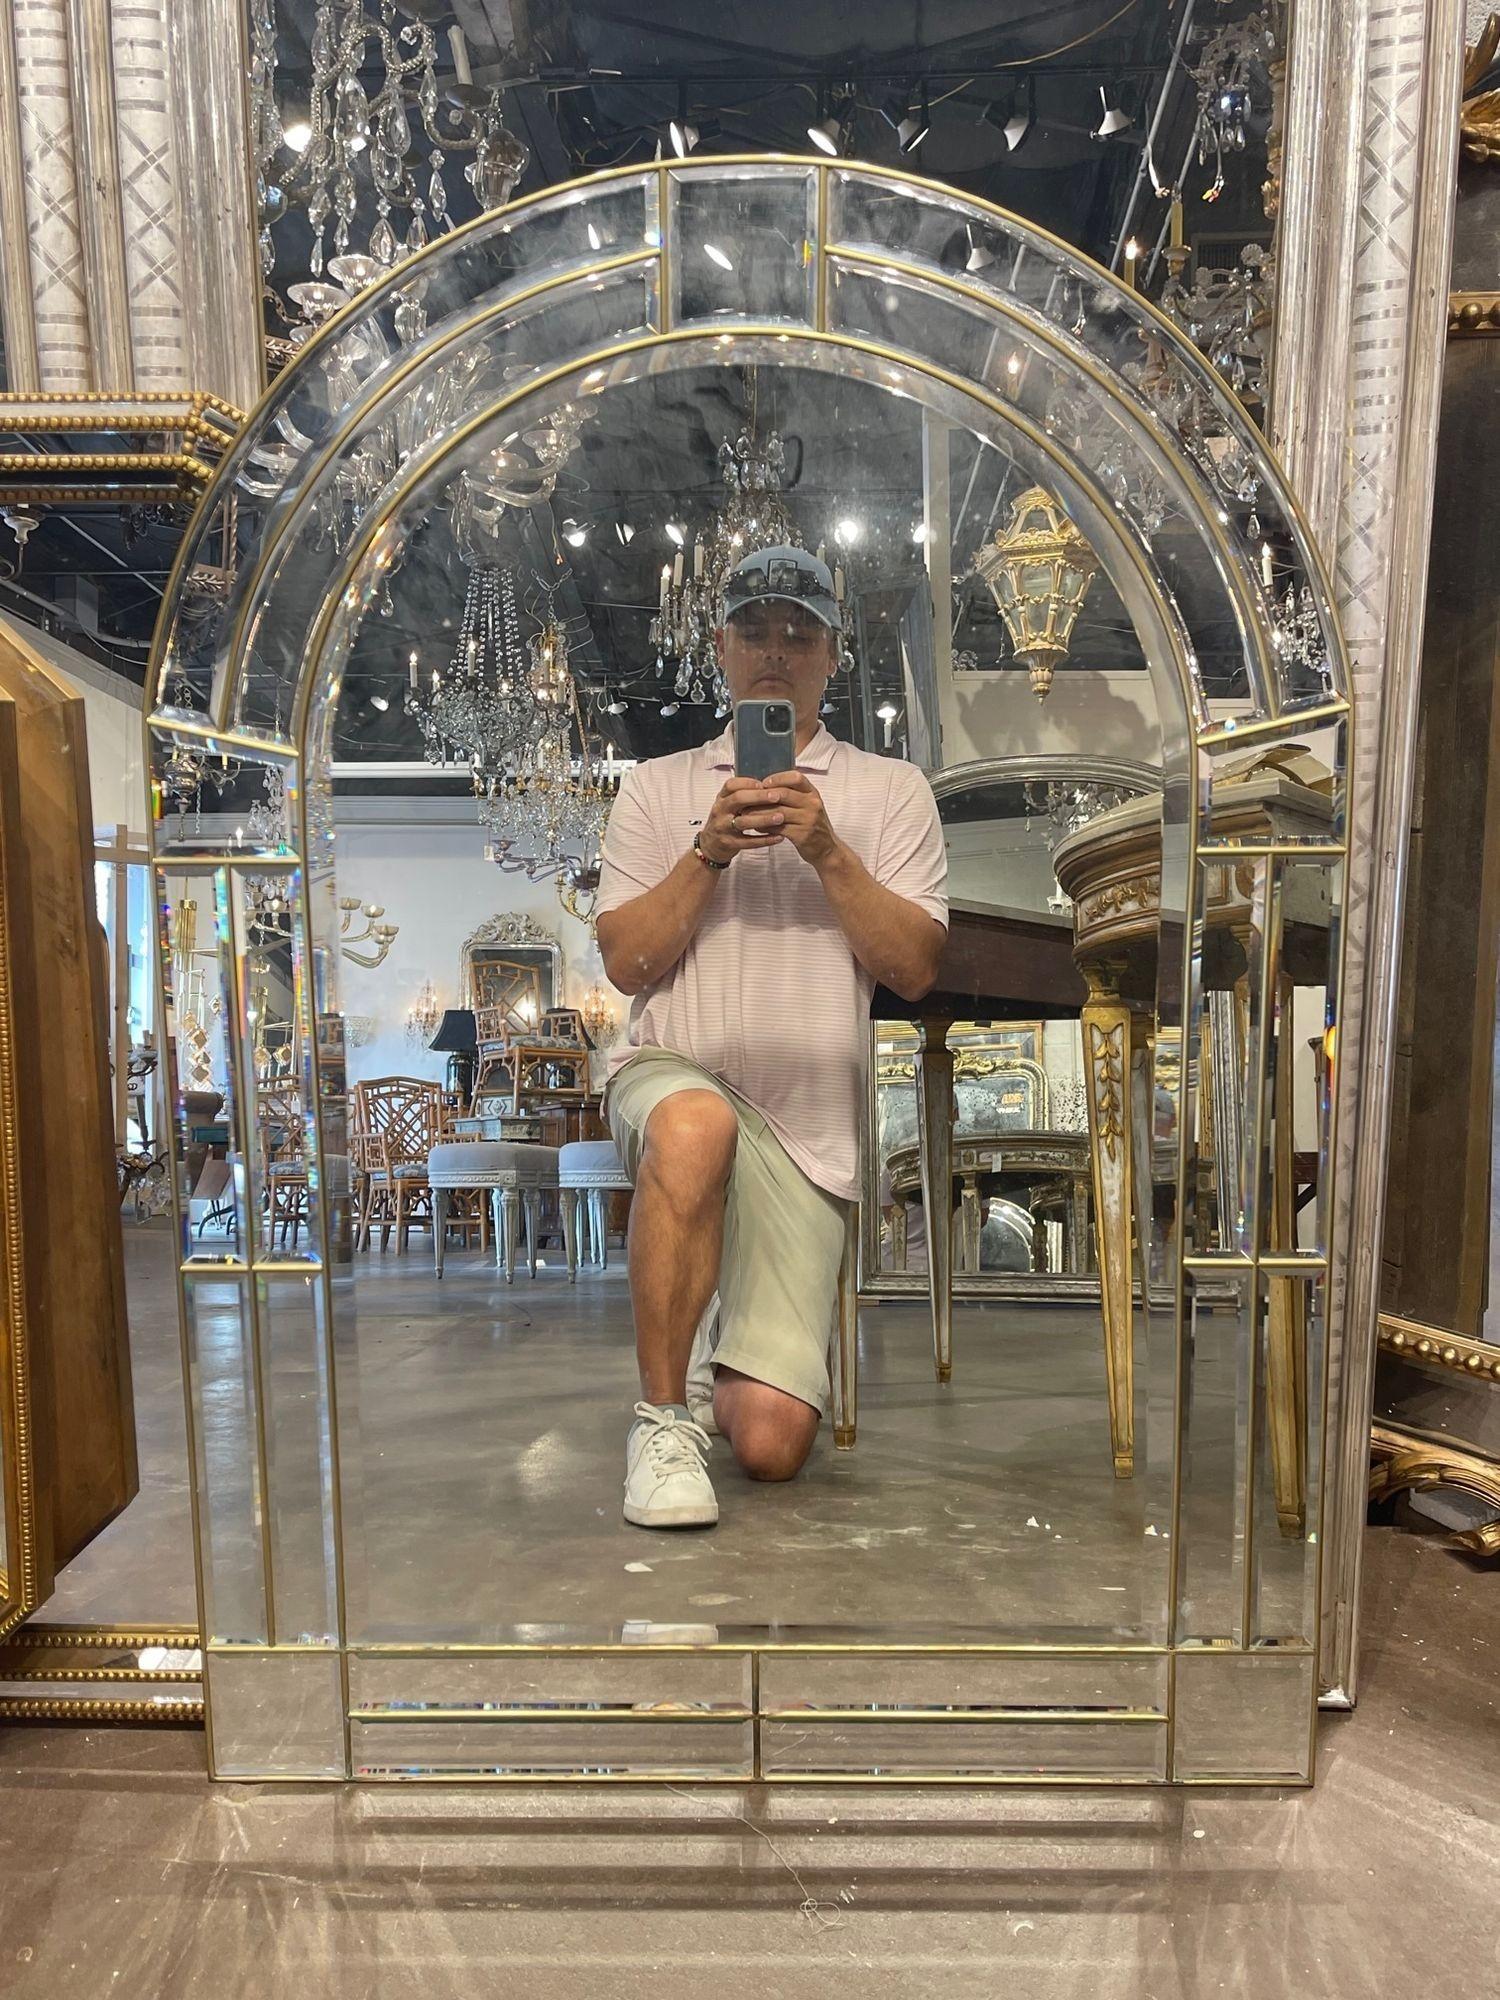 Lovely vintage Italian beveled glass and brass arch topped mirror. This fabulous mirror would be great for traditional or modern decor. Outstanding!